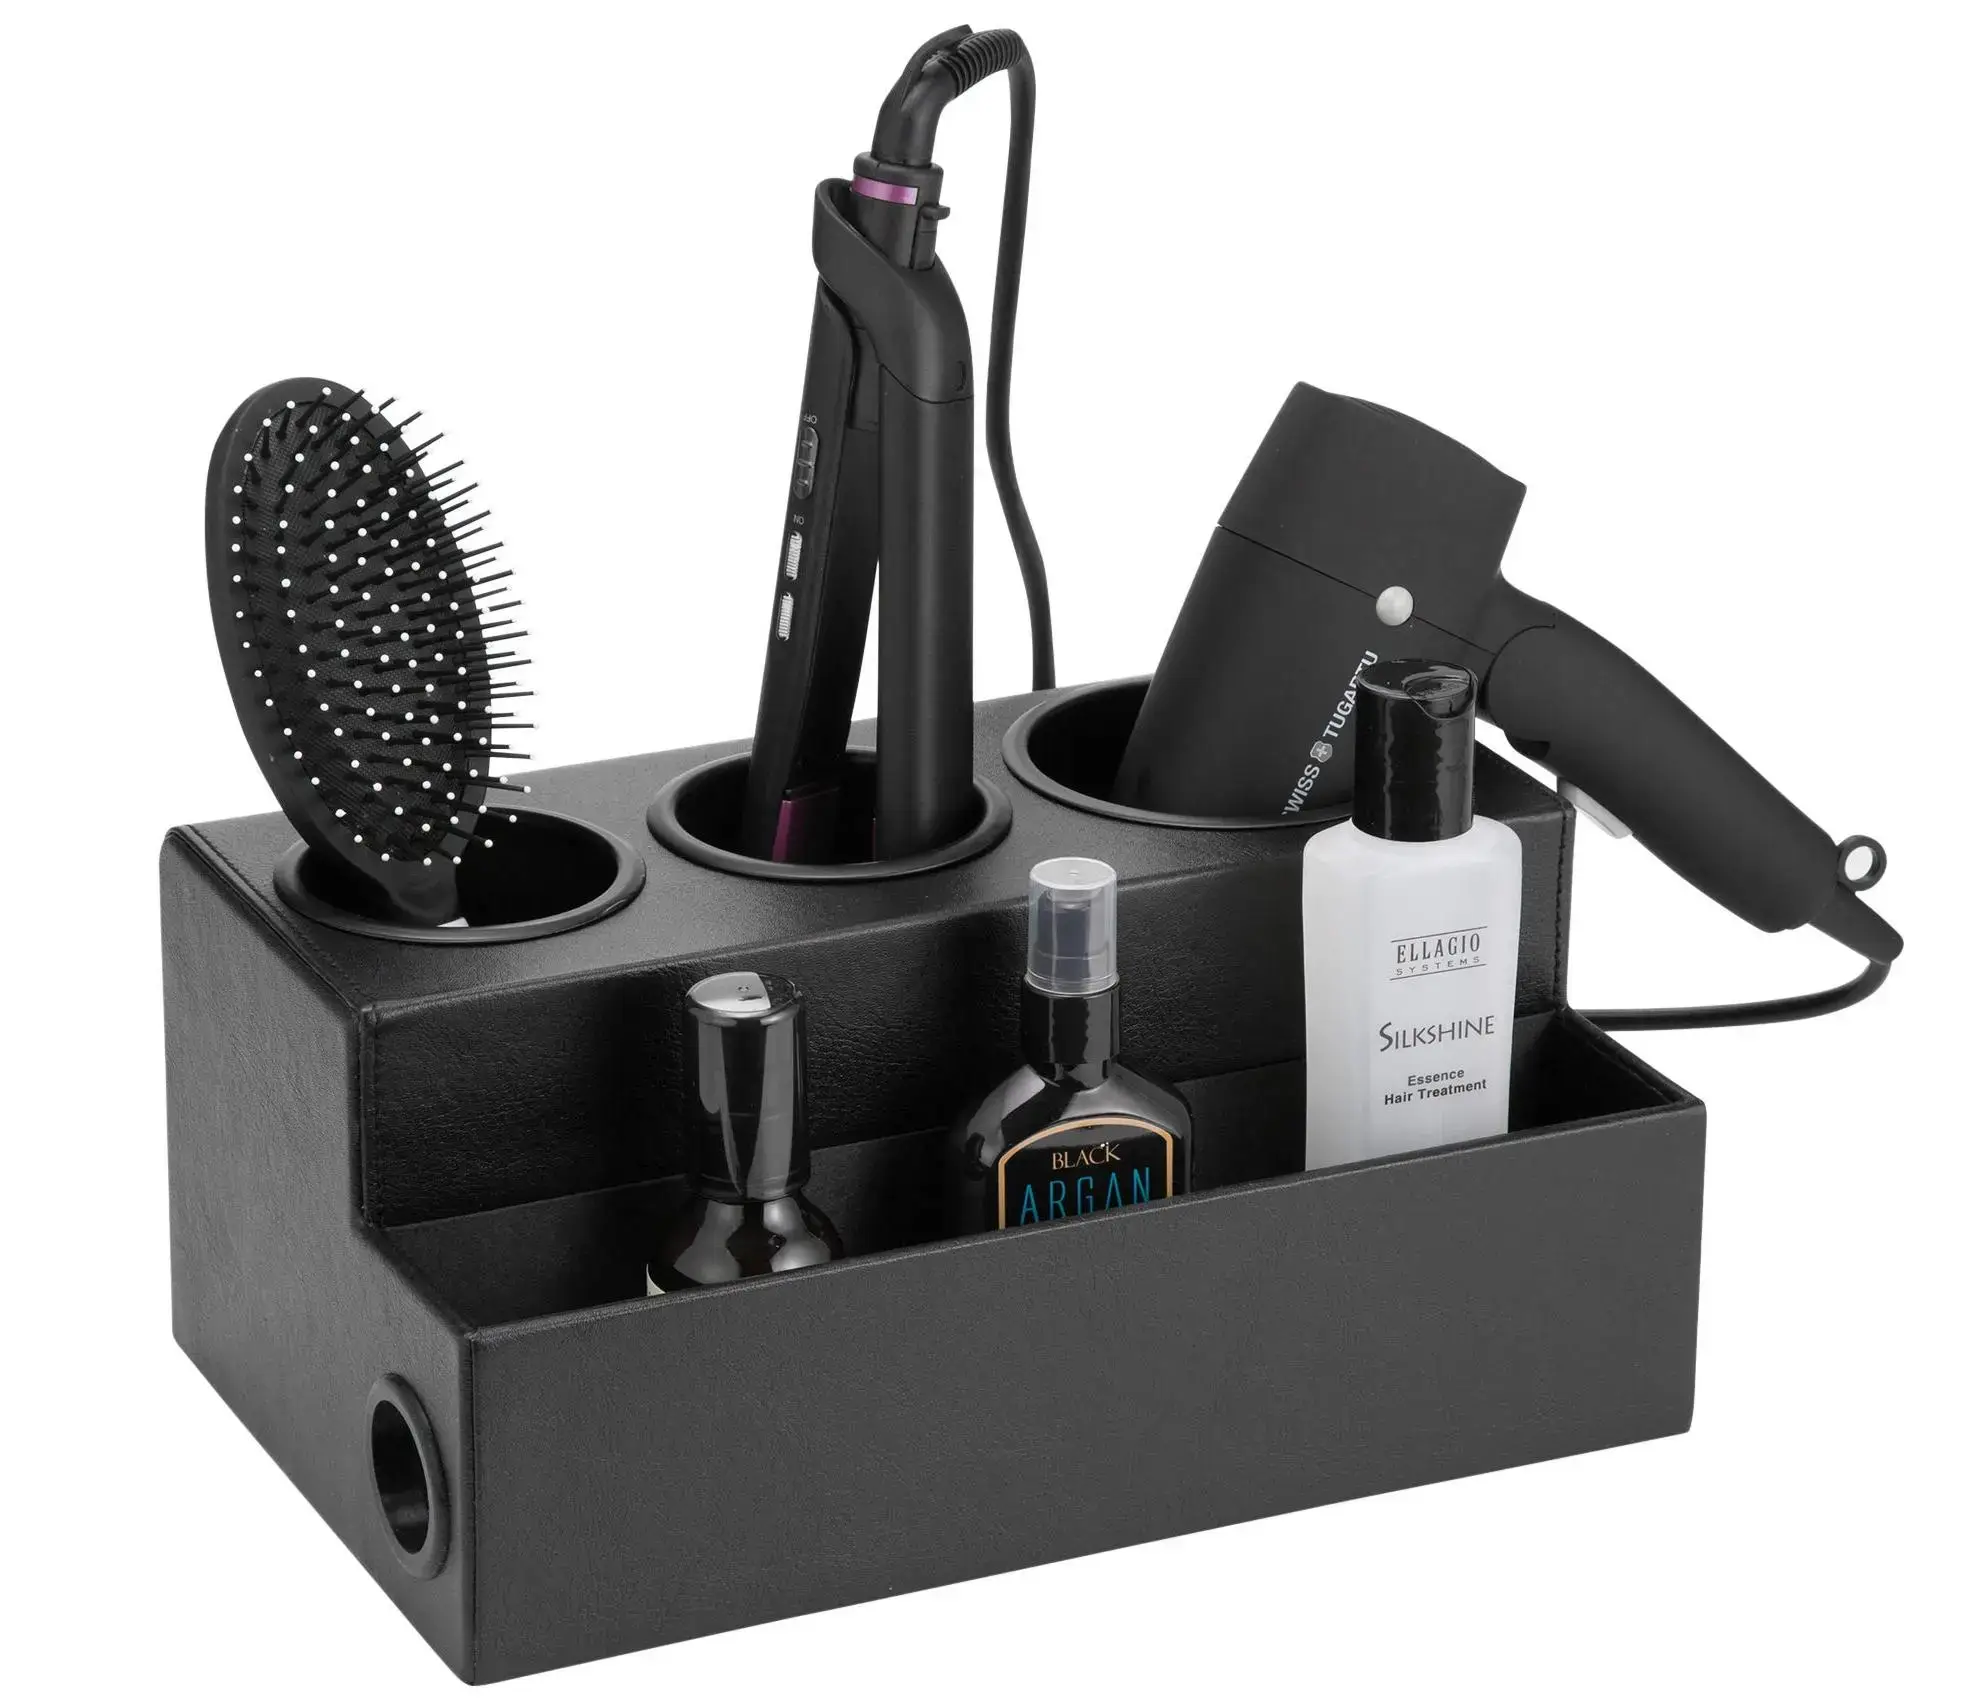 Hair dryer and styling tools organized in a black caddy.